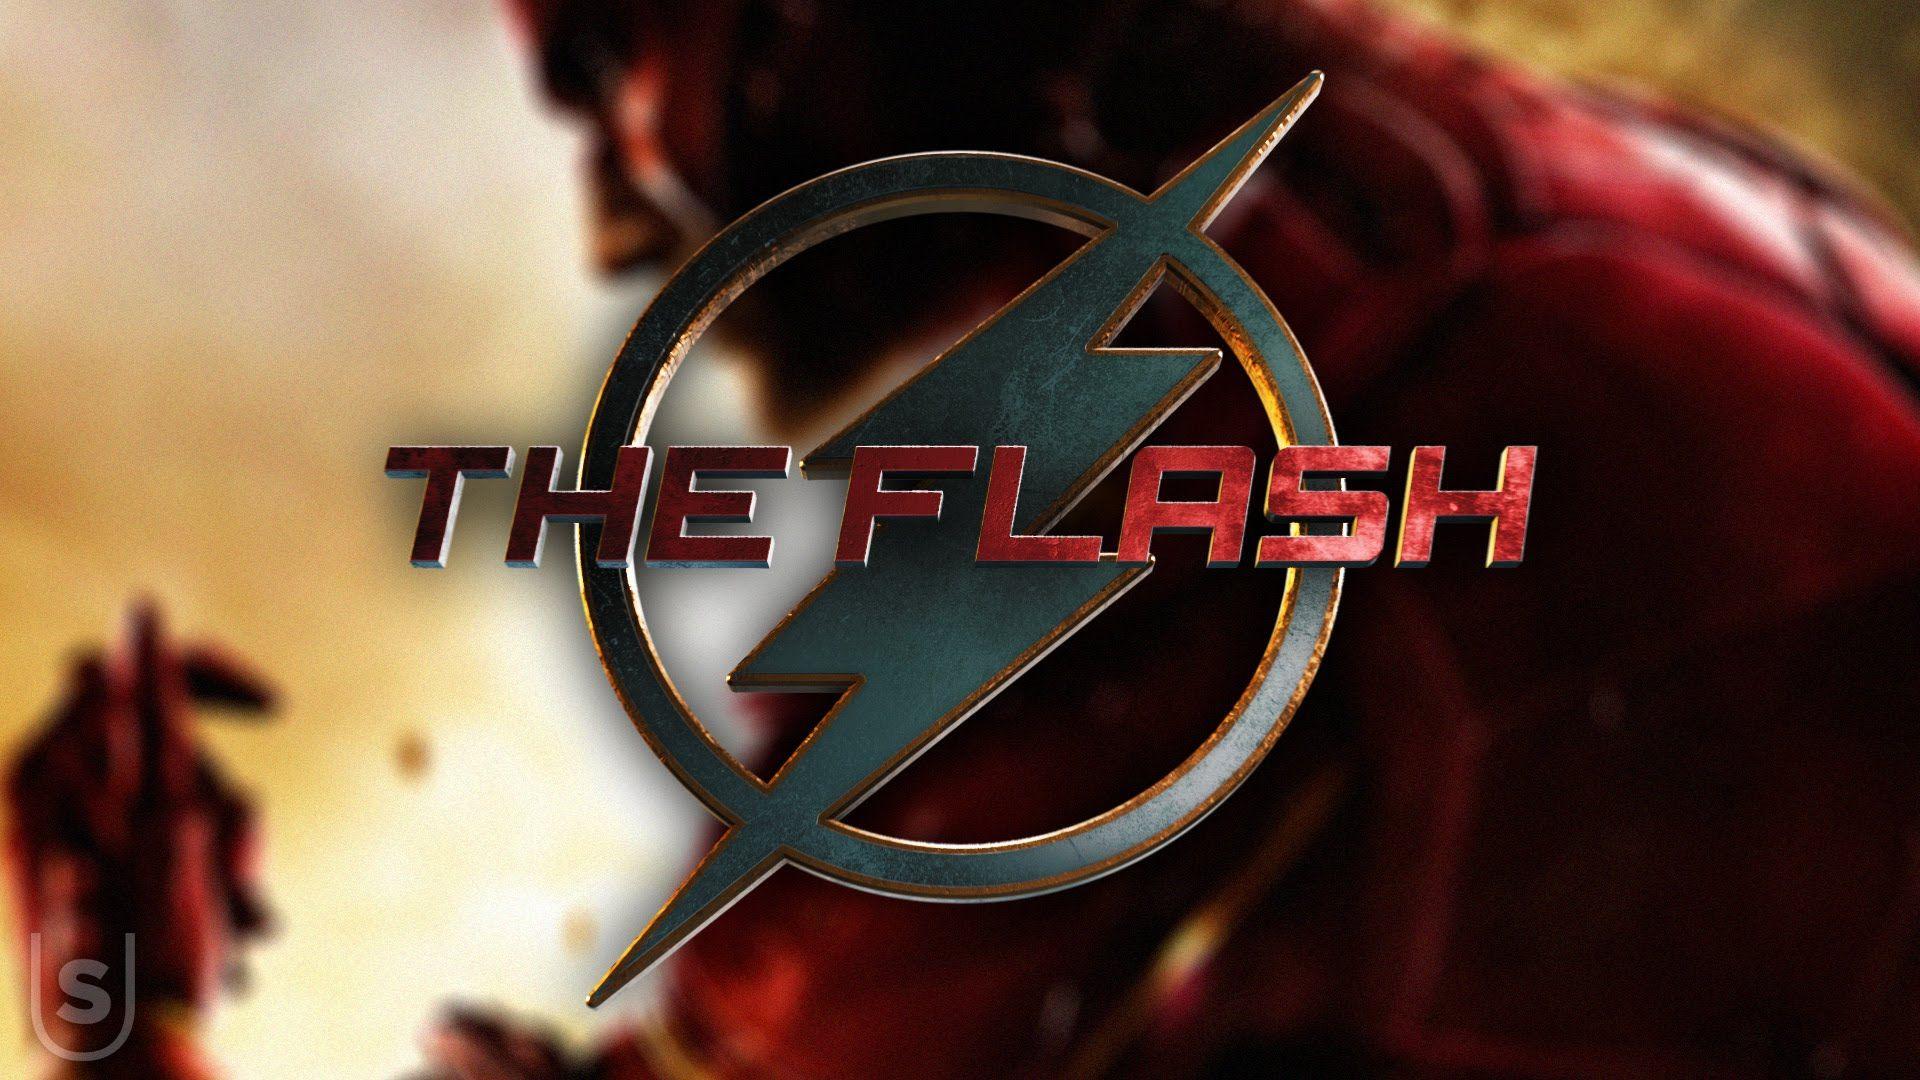 The Flash (2018) wallpaper, Movie, HQ The Flash (2018) picture